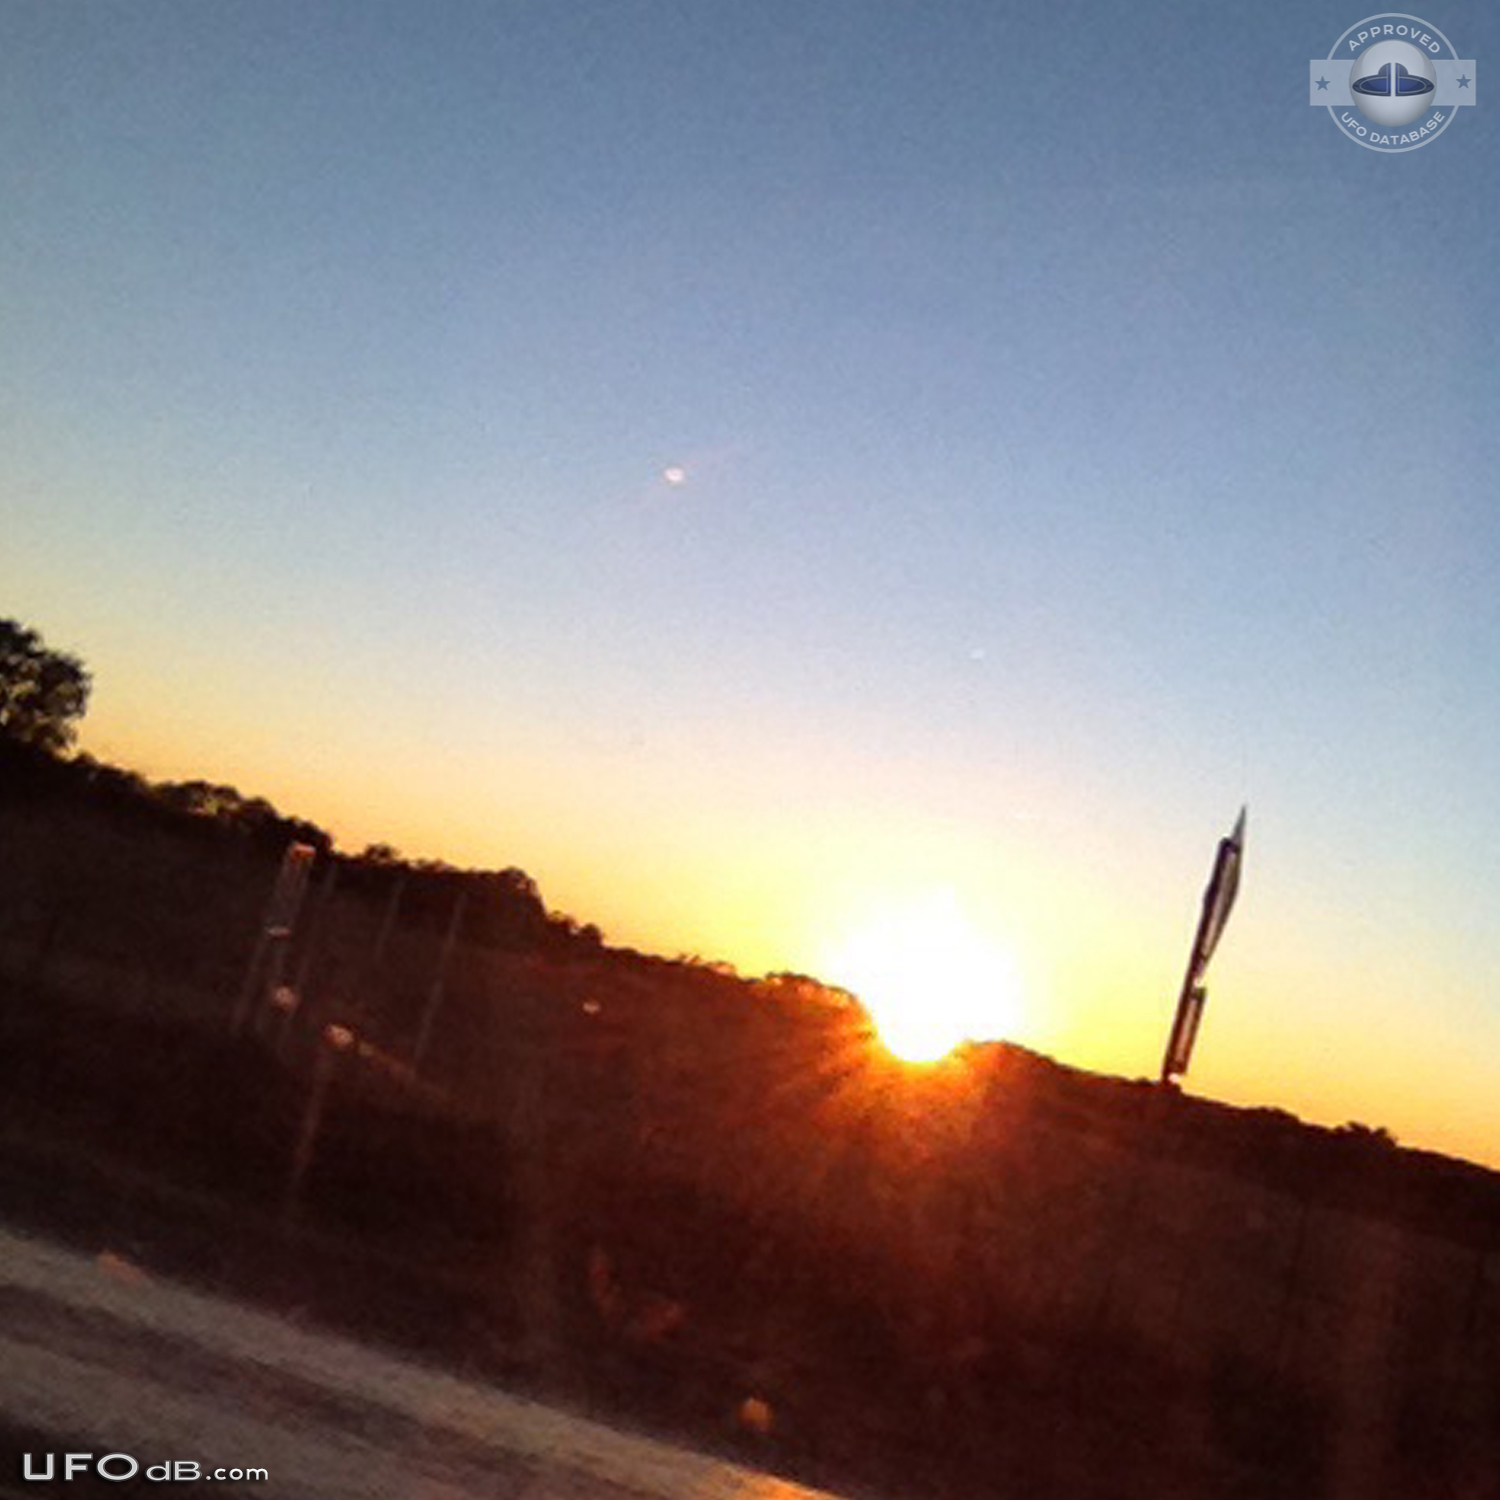 Very Reflective Sphere UFO caught on picture in Boerne, Texas 2013 UFO Picture #557-1